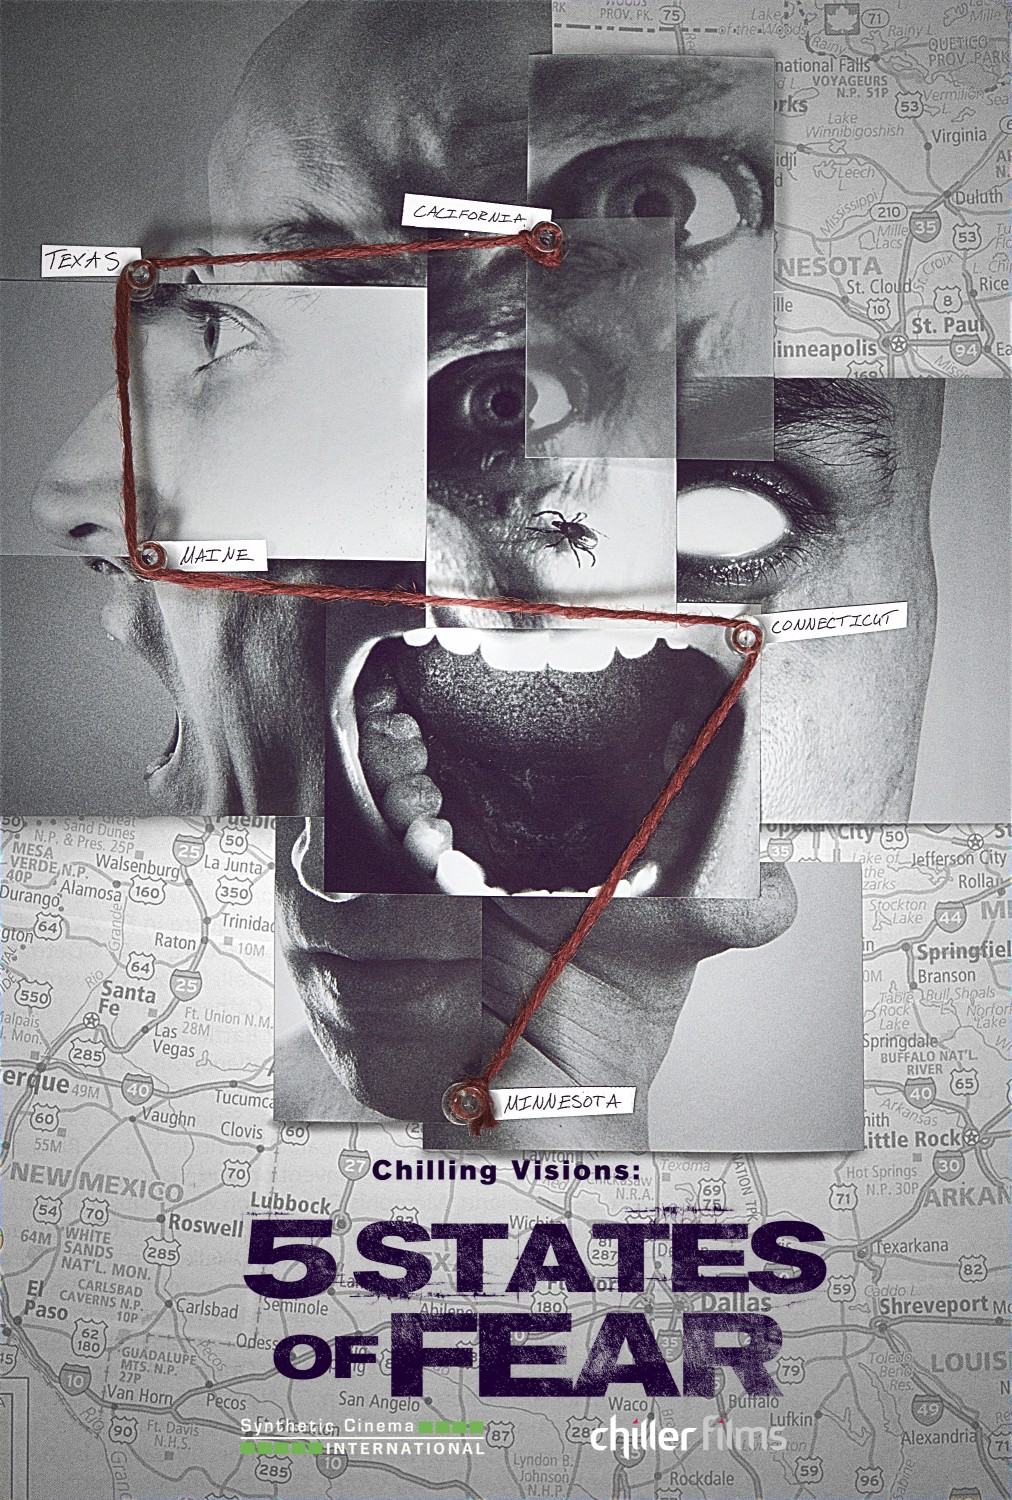 Extra Large Movie Poster Image for Chilling Visions: 5 States of Fear 